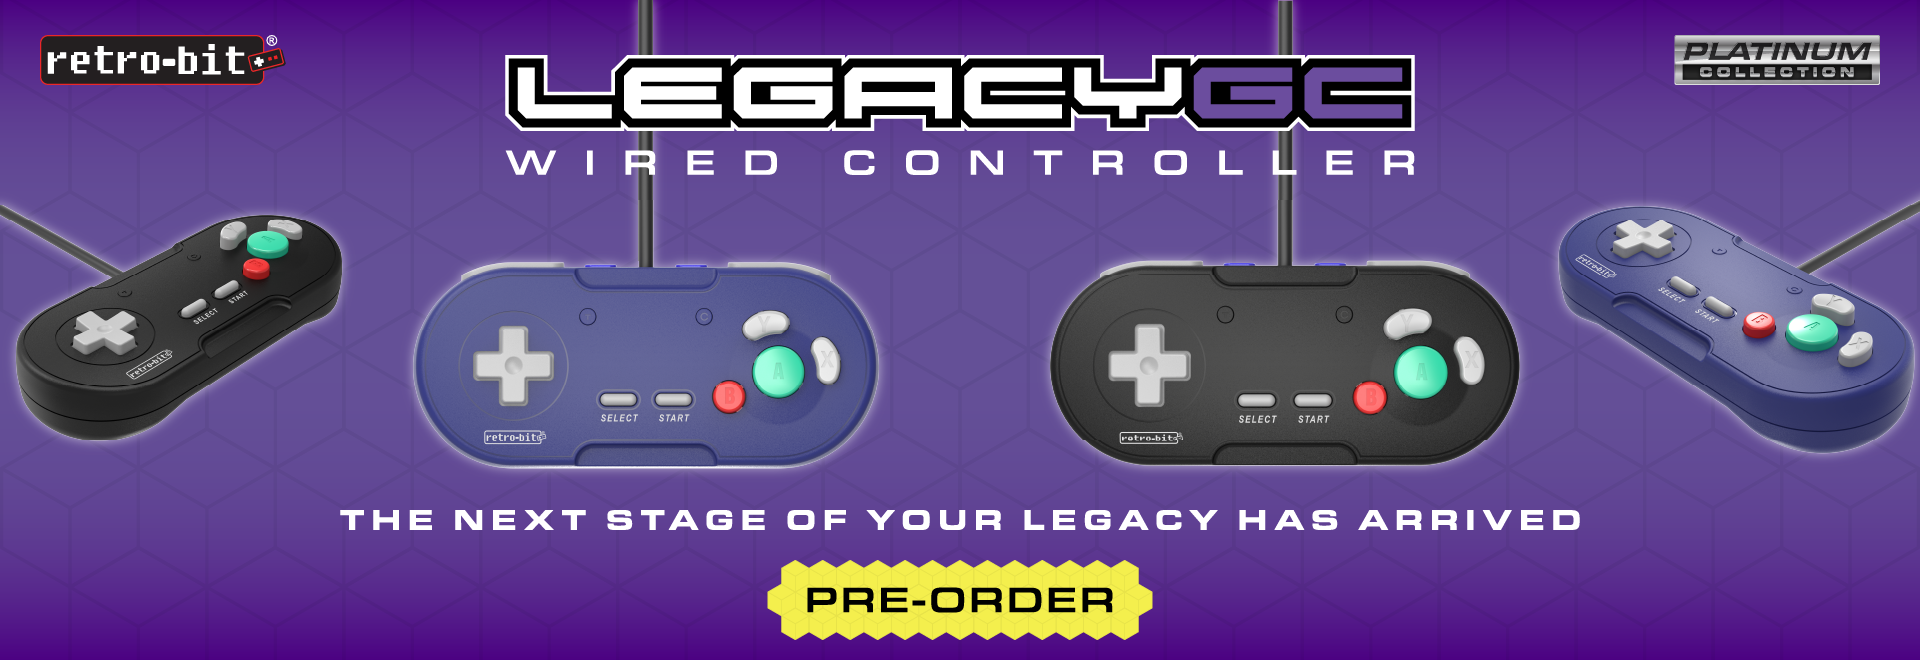 LegacyGC - The next stage of your legacy has arrived!